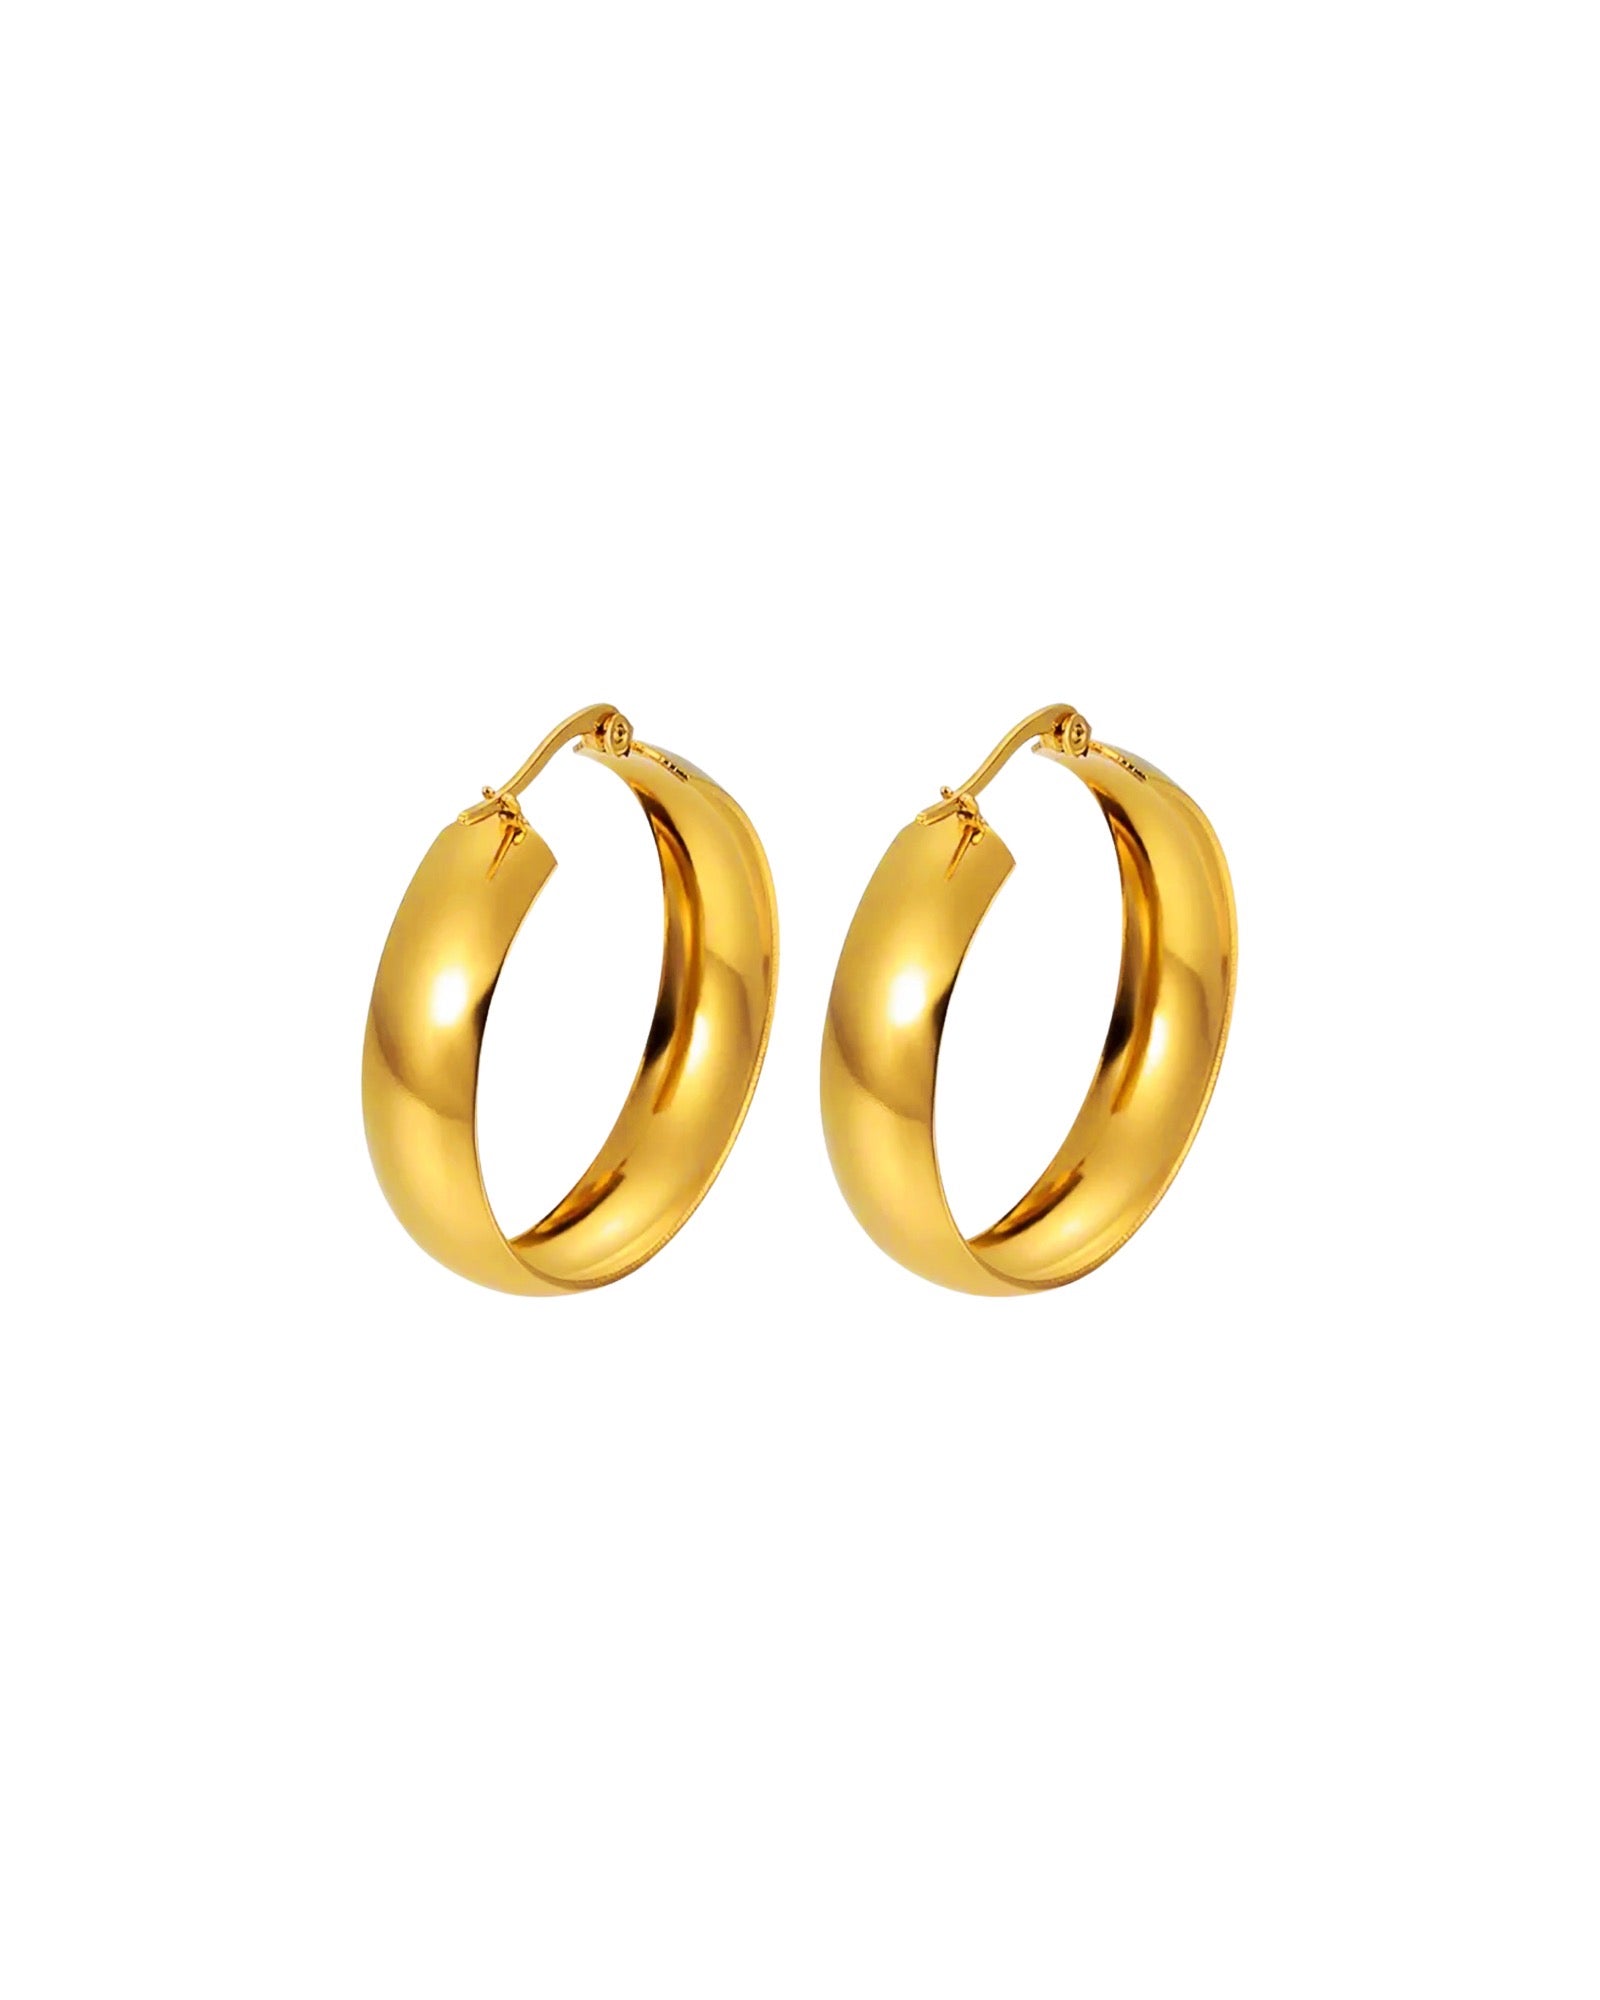 30mm  Gorgeous Gorgeous Girls Hoops (18k Gold)